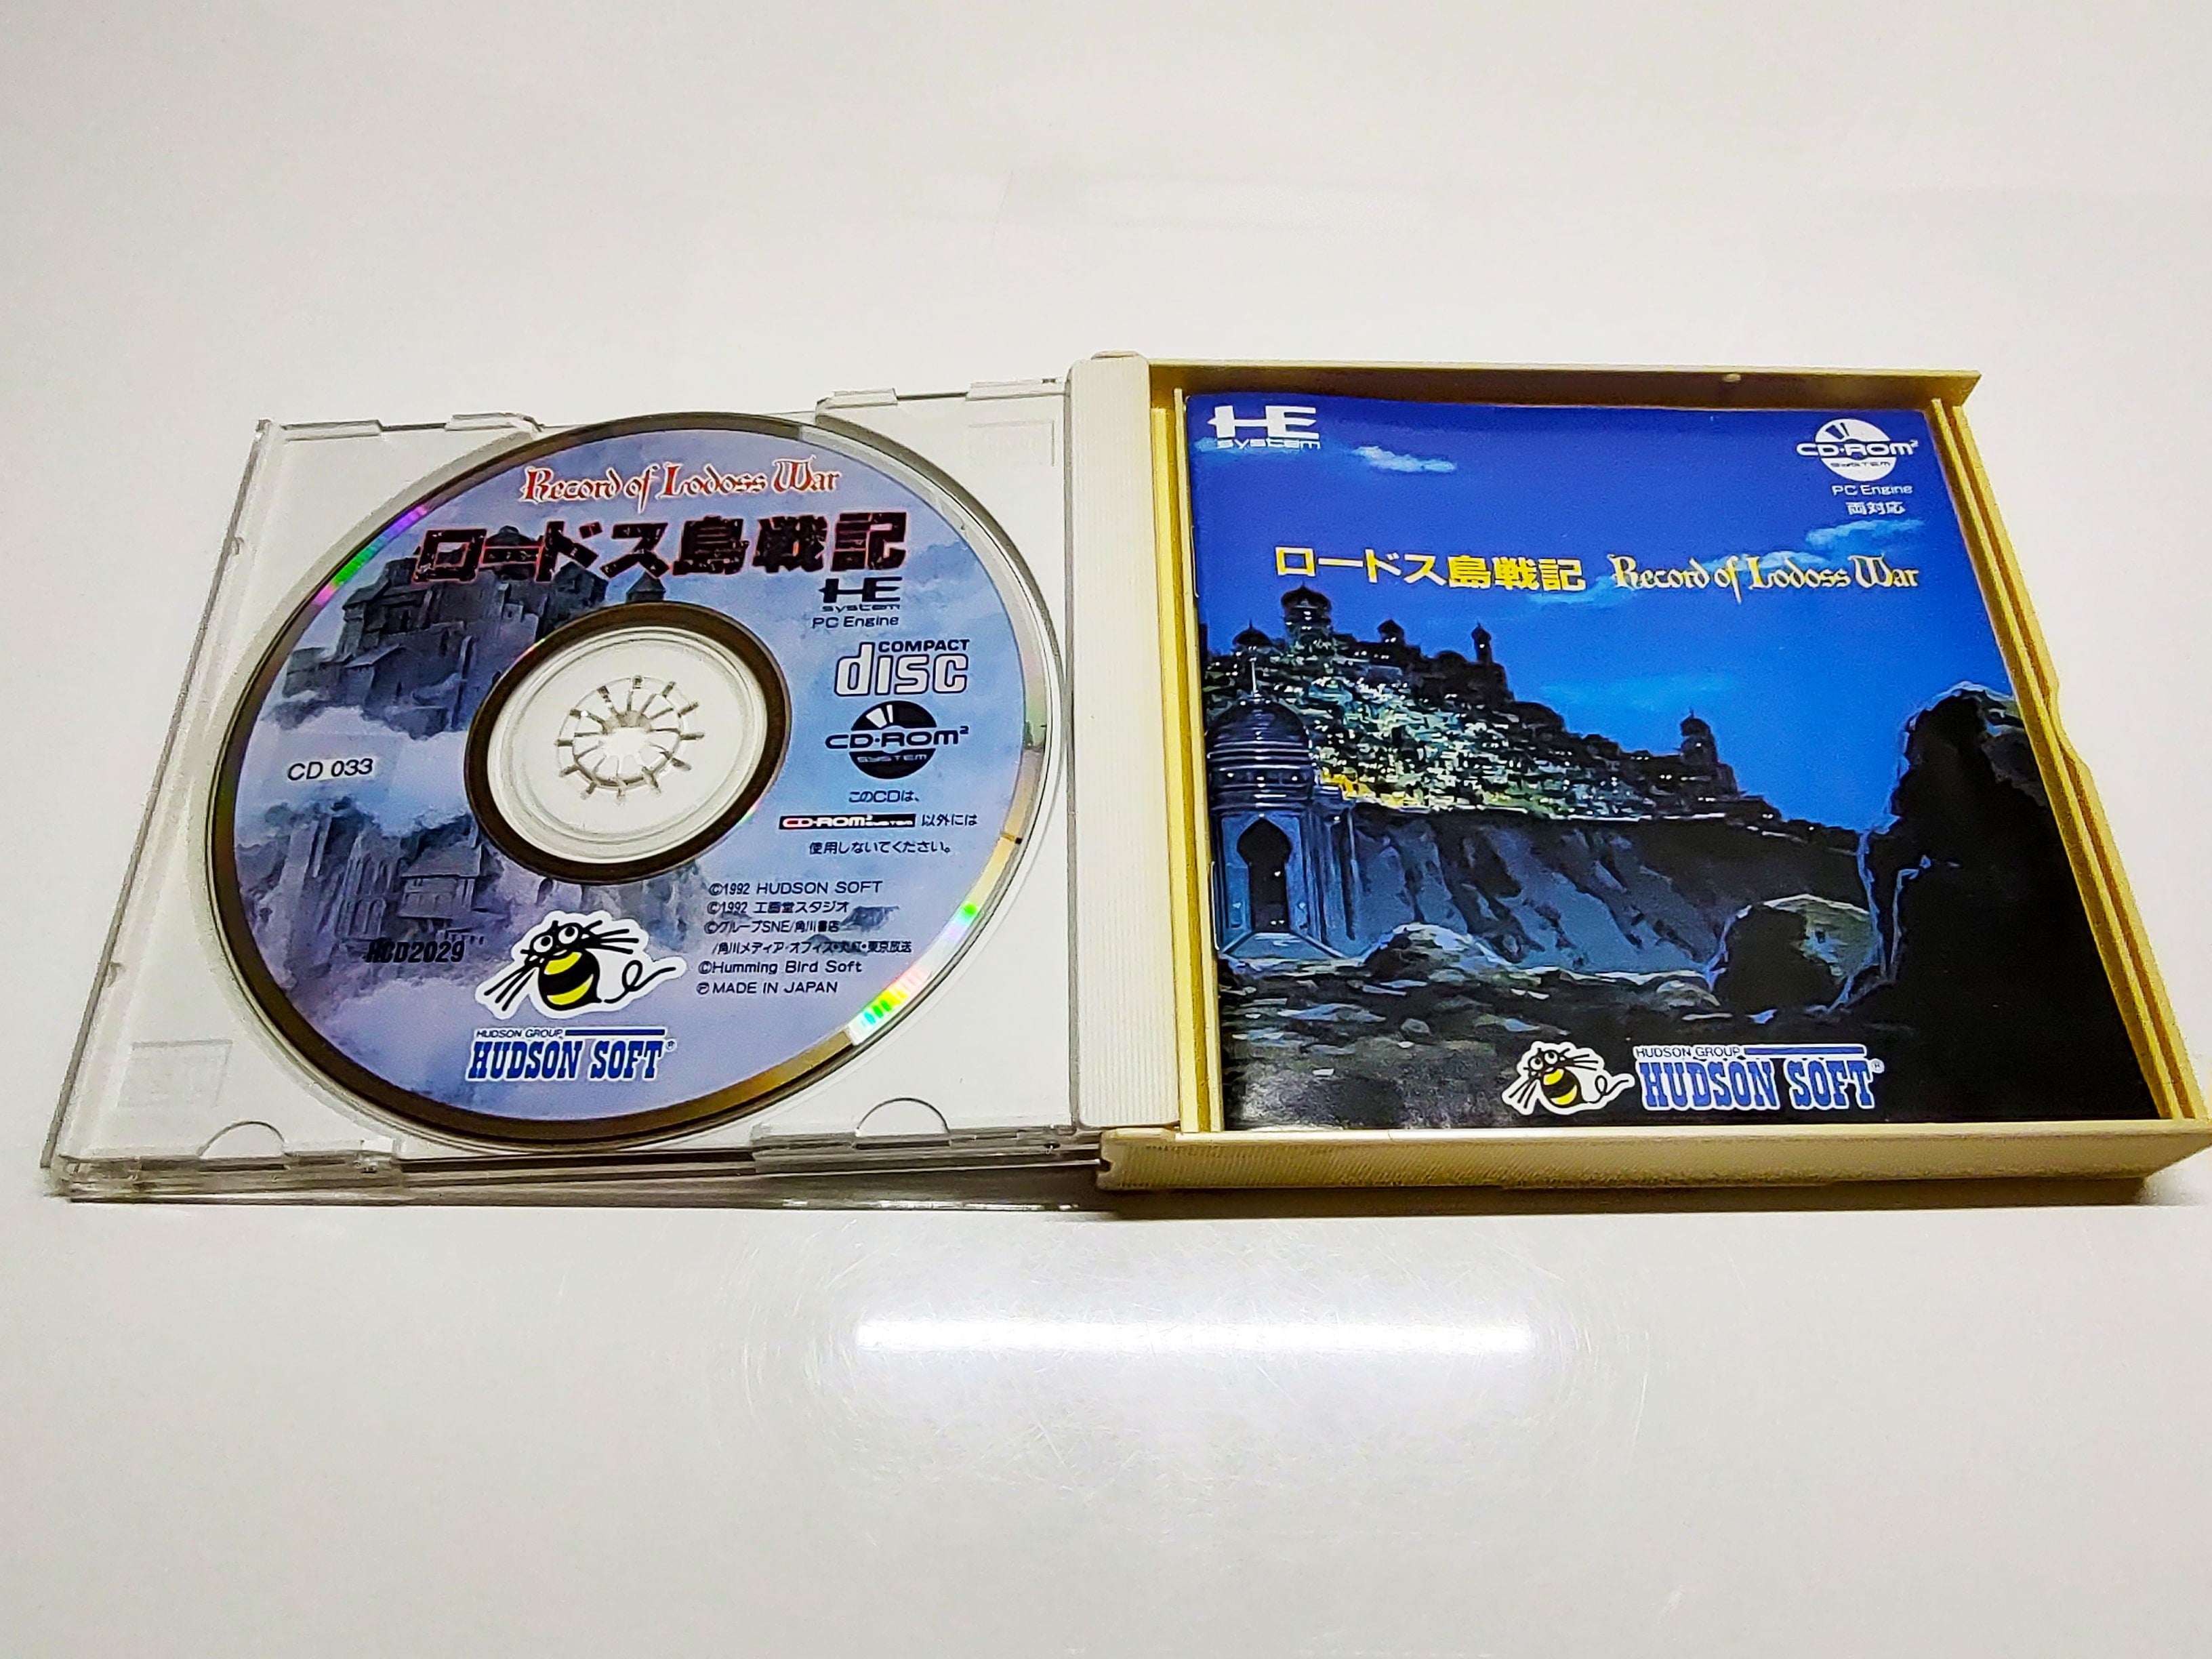 Record of Lodoss War | PC Engine Super CD | Disc and manual